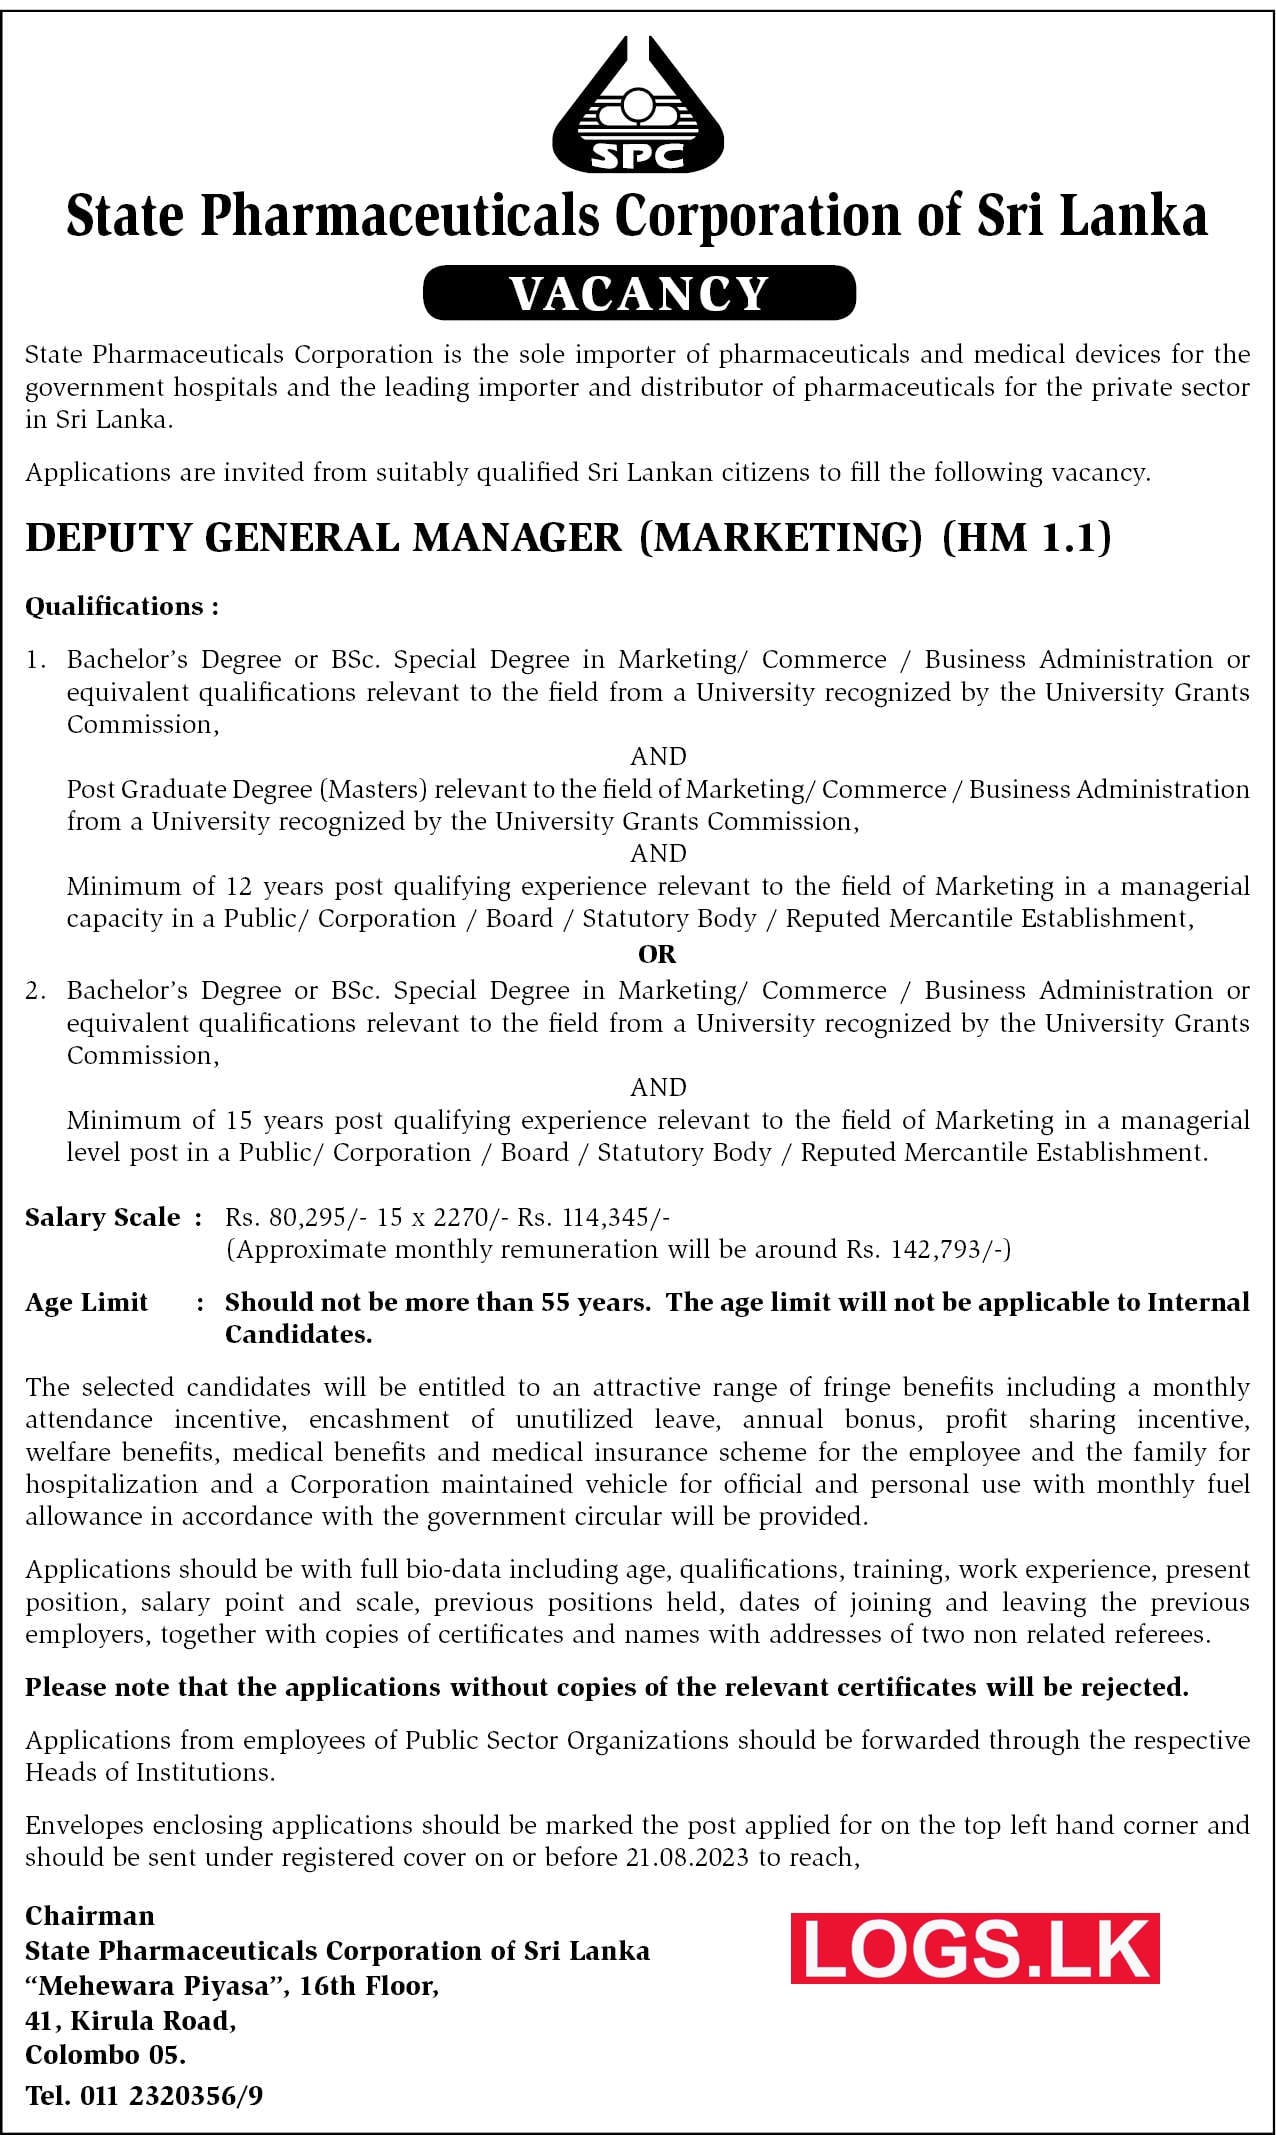 Deputy General Manager - State Pharmaceuticals Corporation Vacancies 2023 Application Form